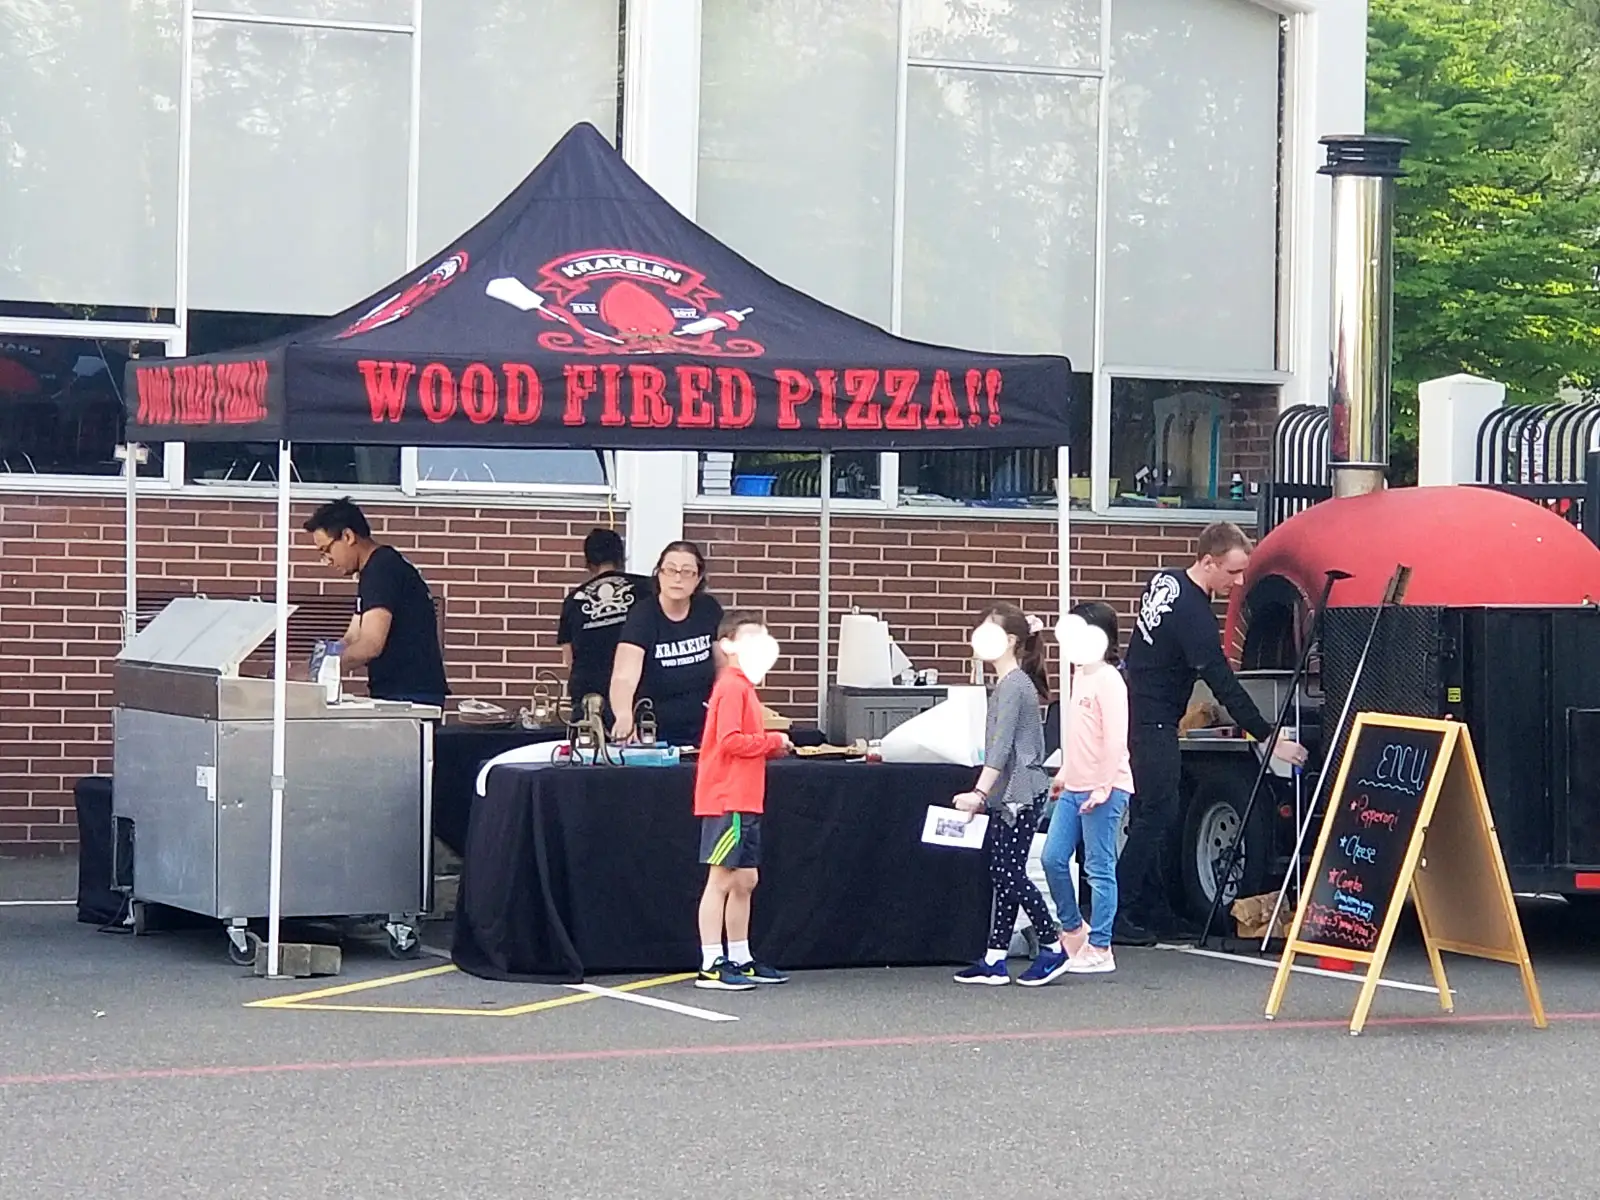 A Krakelen pizza food tent with staff using a grill and wood oven, at the Wilsonville campus